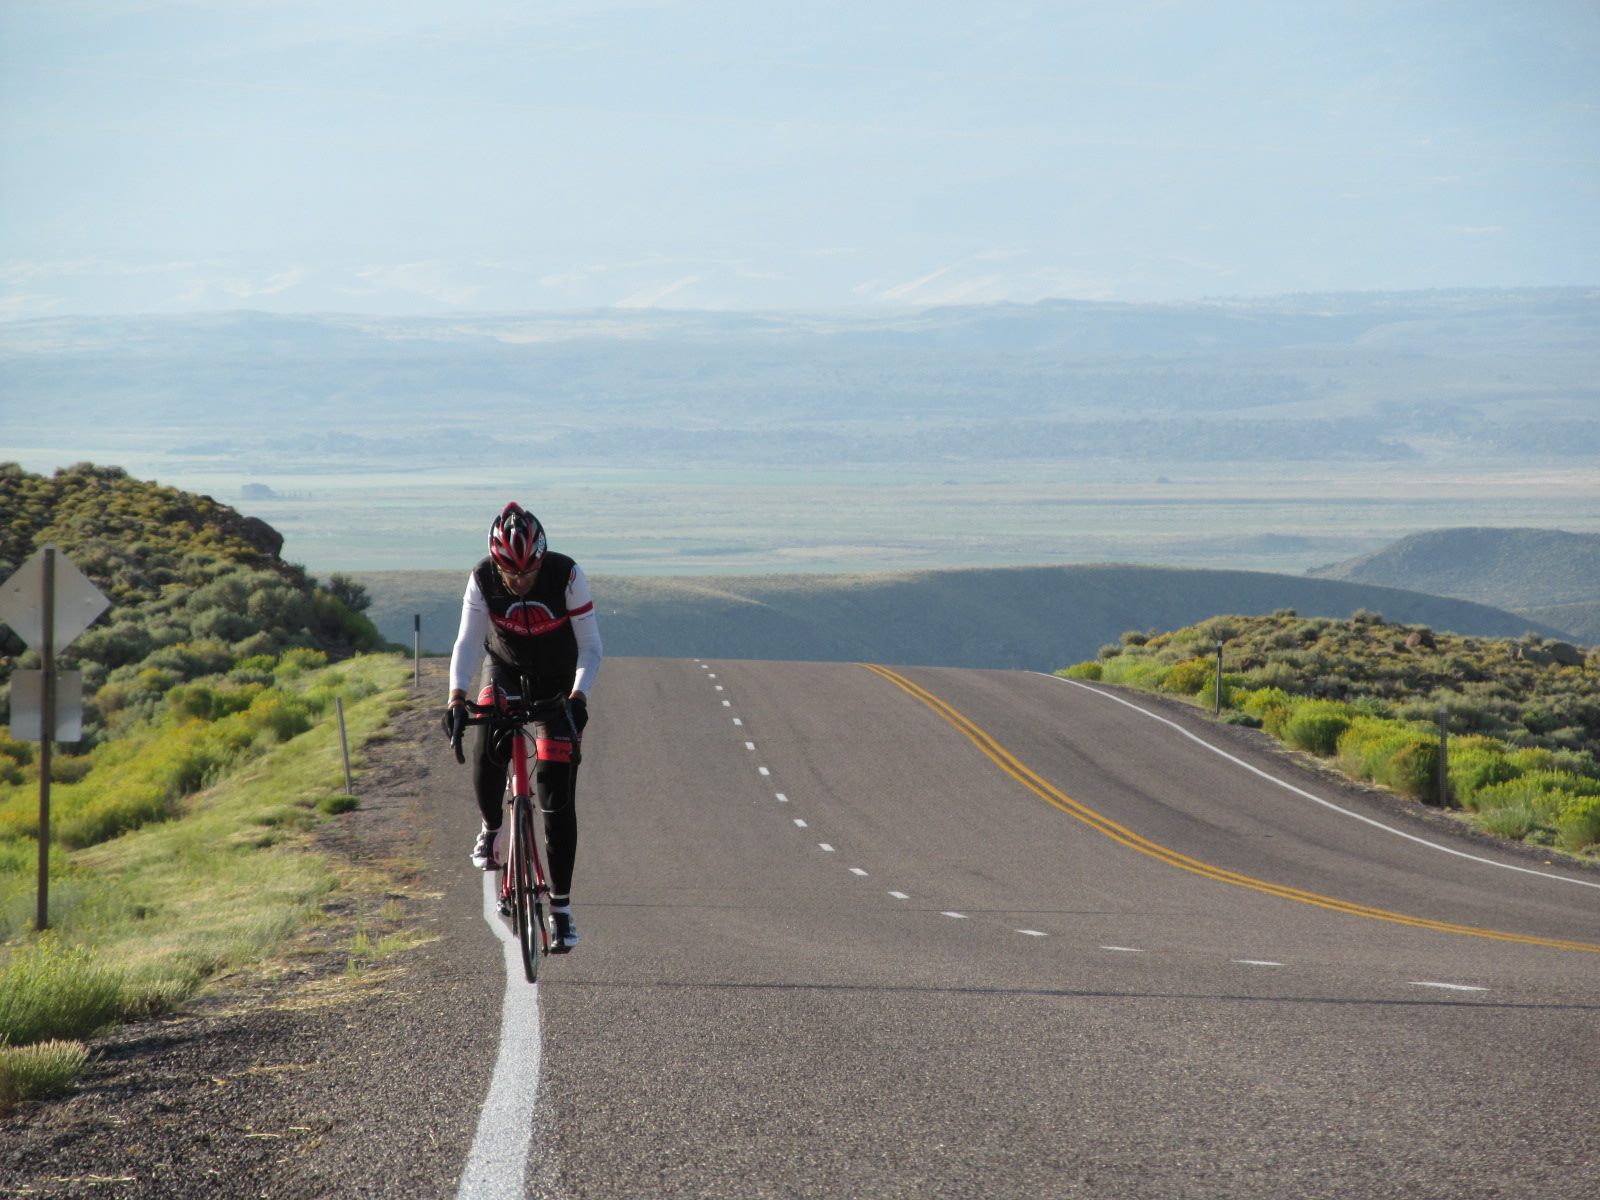 Where Beauty and Suffering Converge: Ambassador Steve Burns Shares His Experience with the Power of Bikes Featured Image